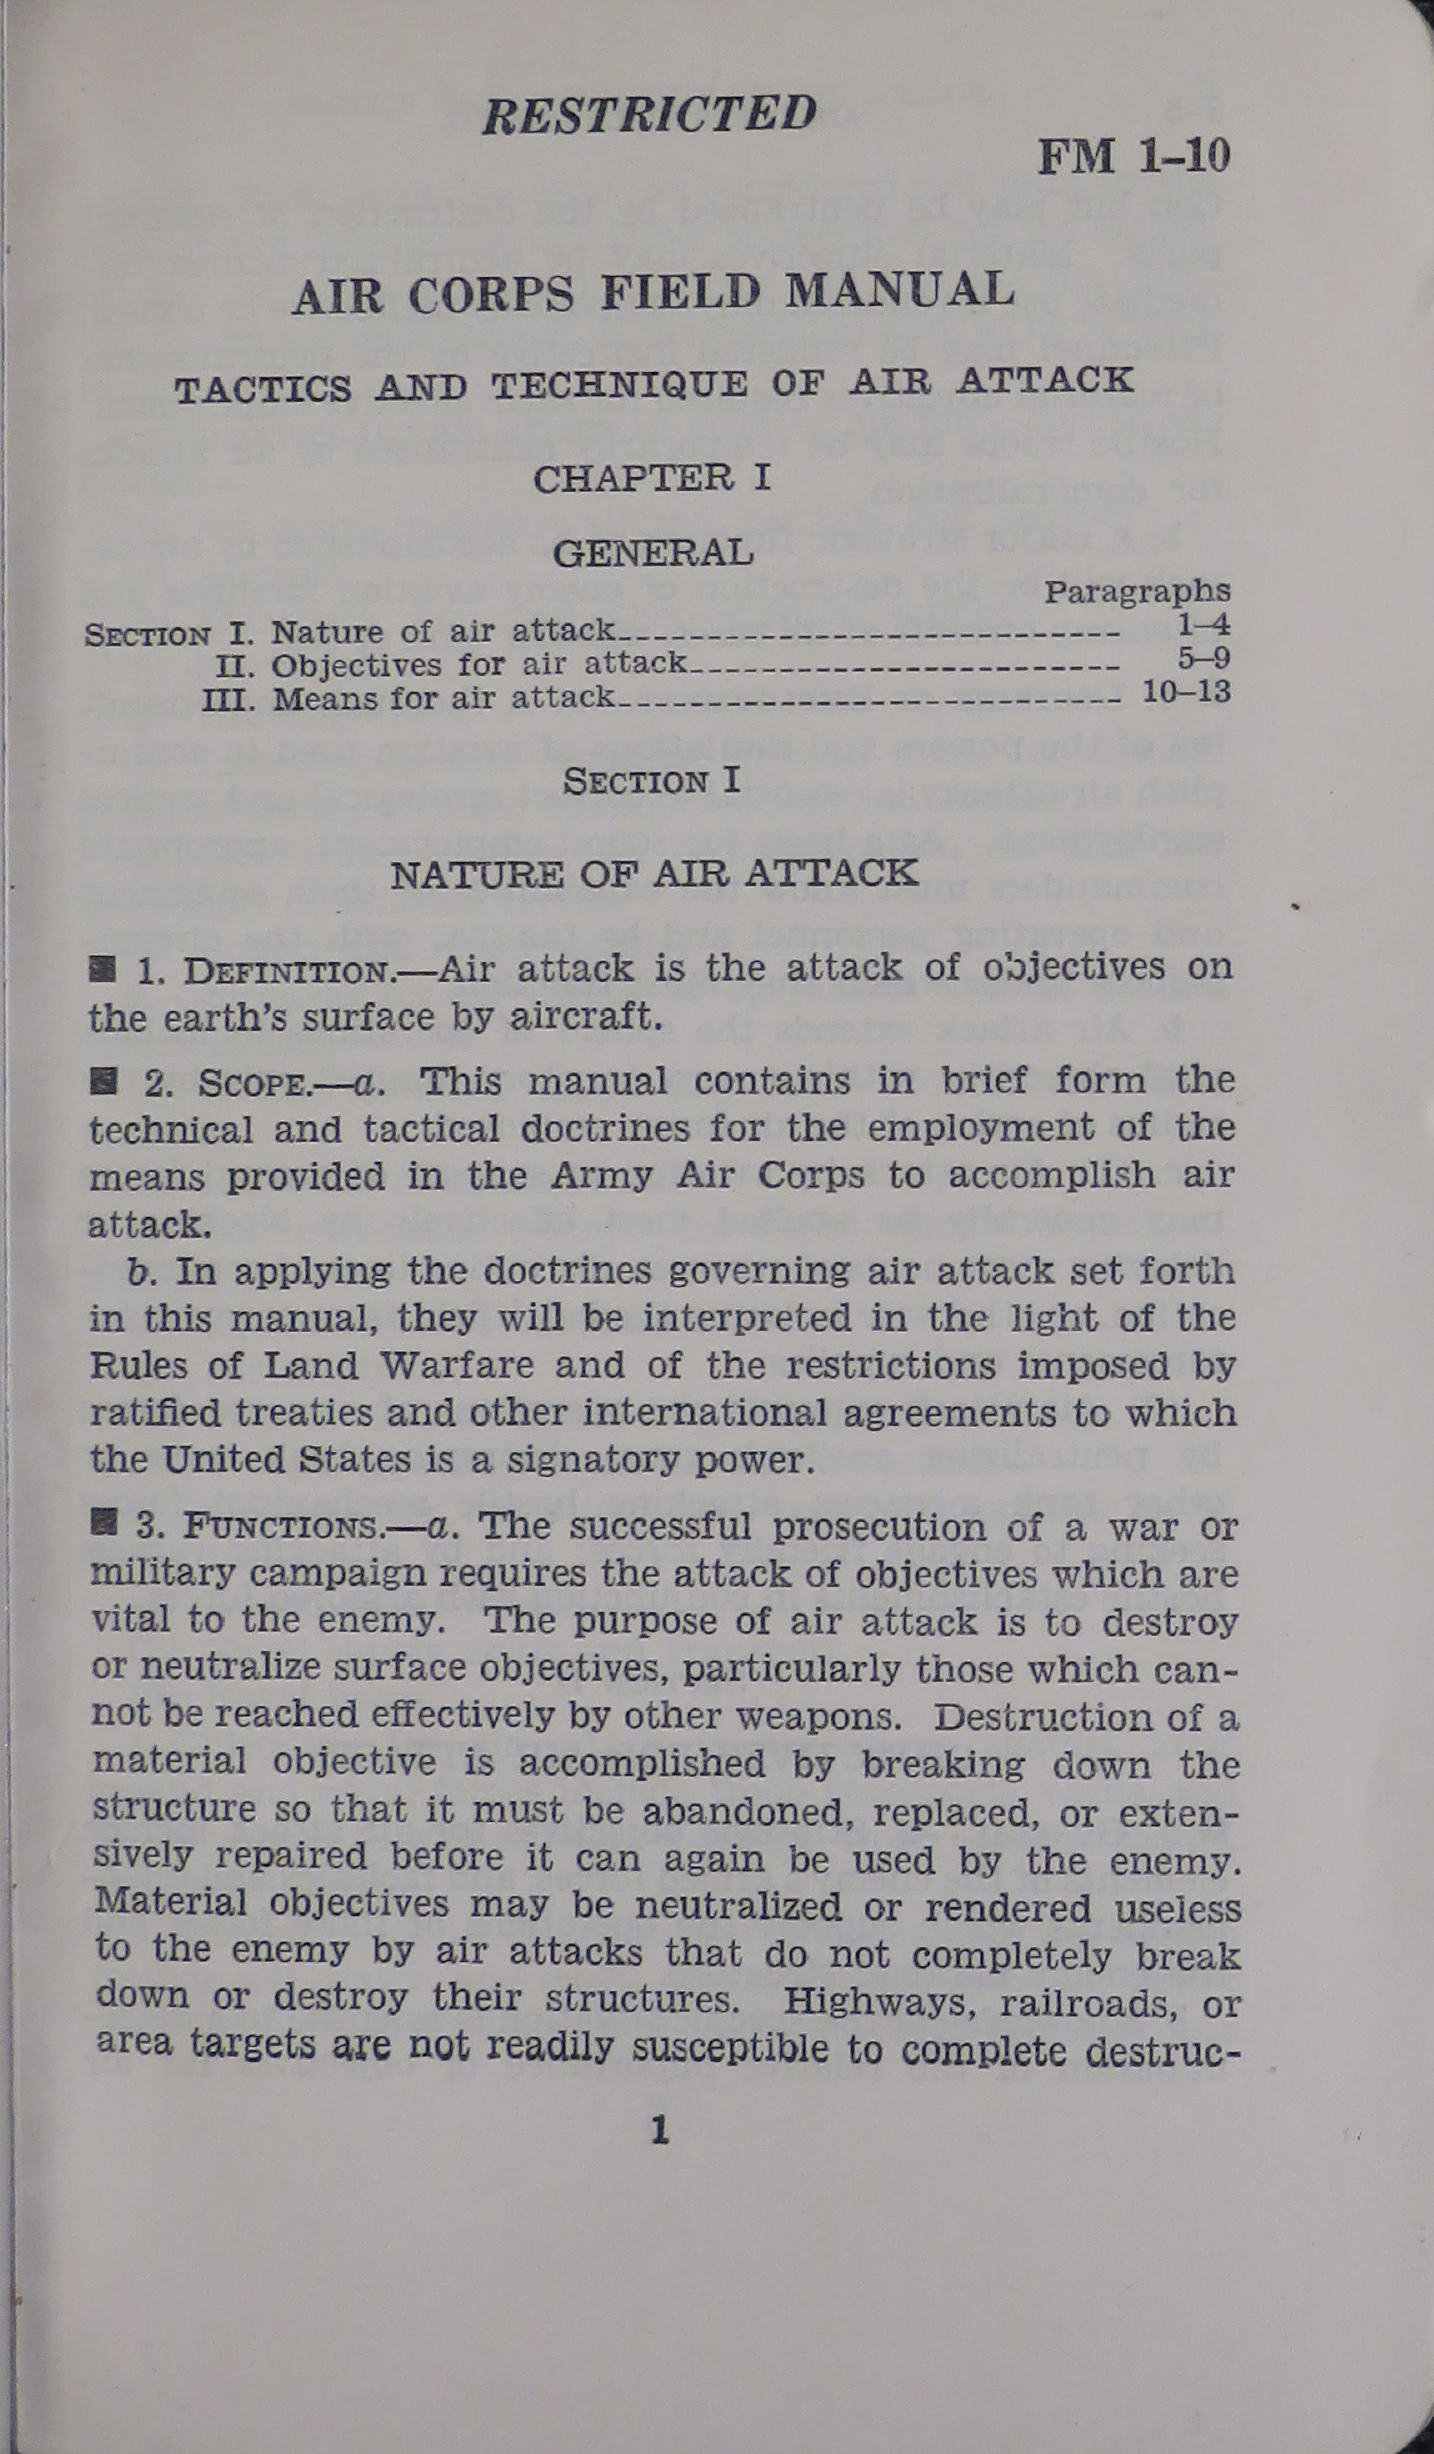 Sample page 7 from AirCorps Library document: Air Corps Field Manual for Tactics and Technique of air Attack